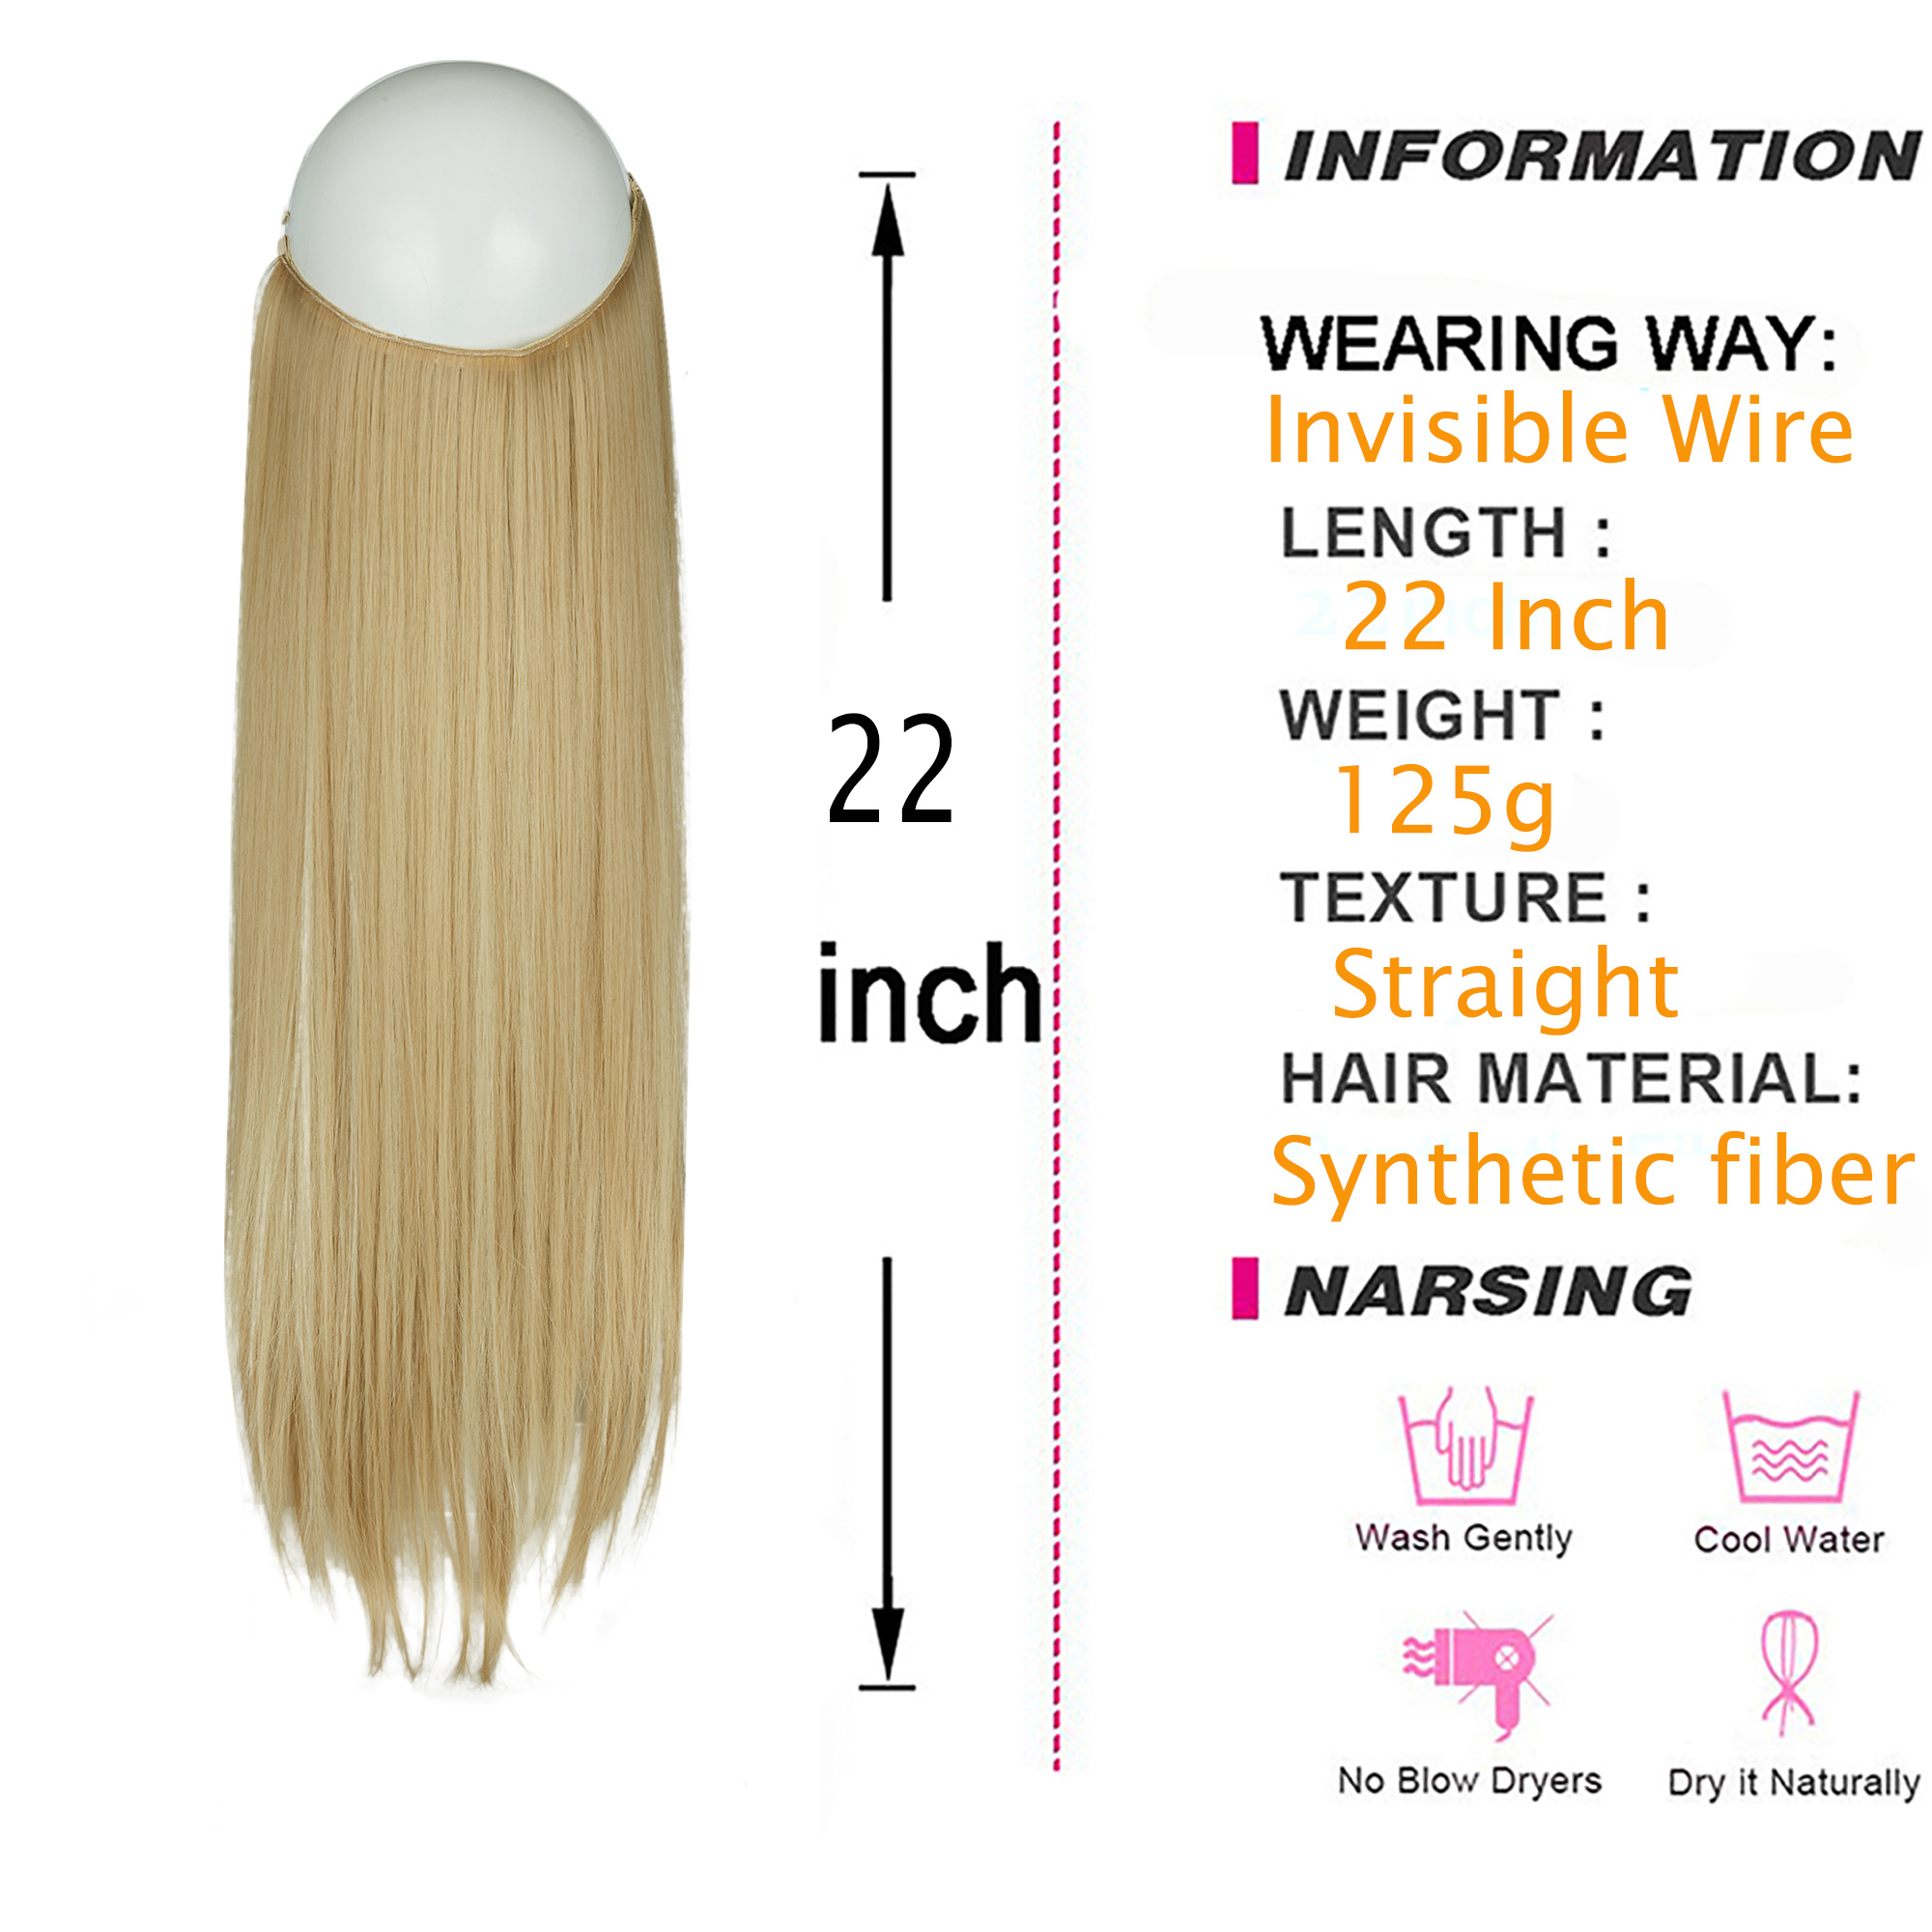 SAYFUT Hair Extension Ash Blonde Invisible Wire Headband 18/20/22 Inch 4.2-4.4 Oz Long Curly Wavy Synthetic Hairpiece for Women Heat Resistant Fiber No Clip Straight Synthetic Hair - image 2 of 8